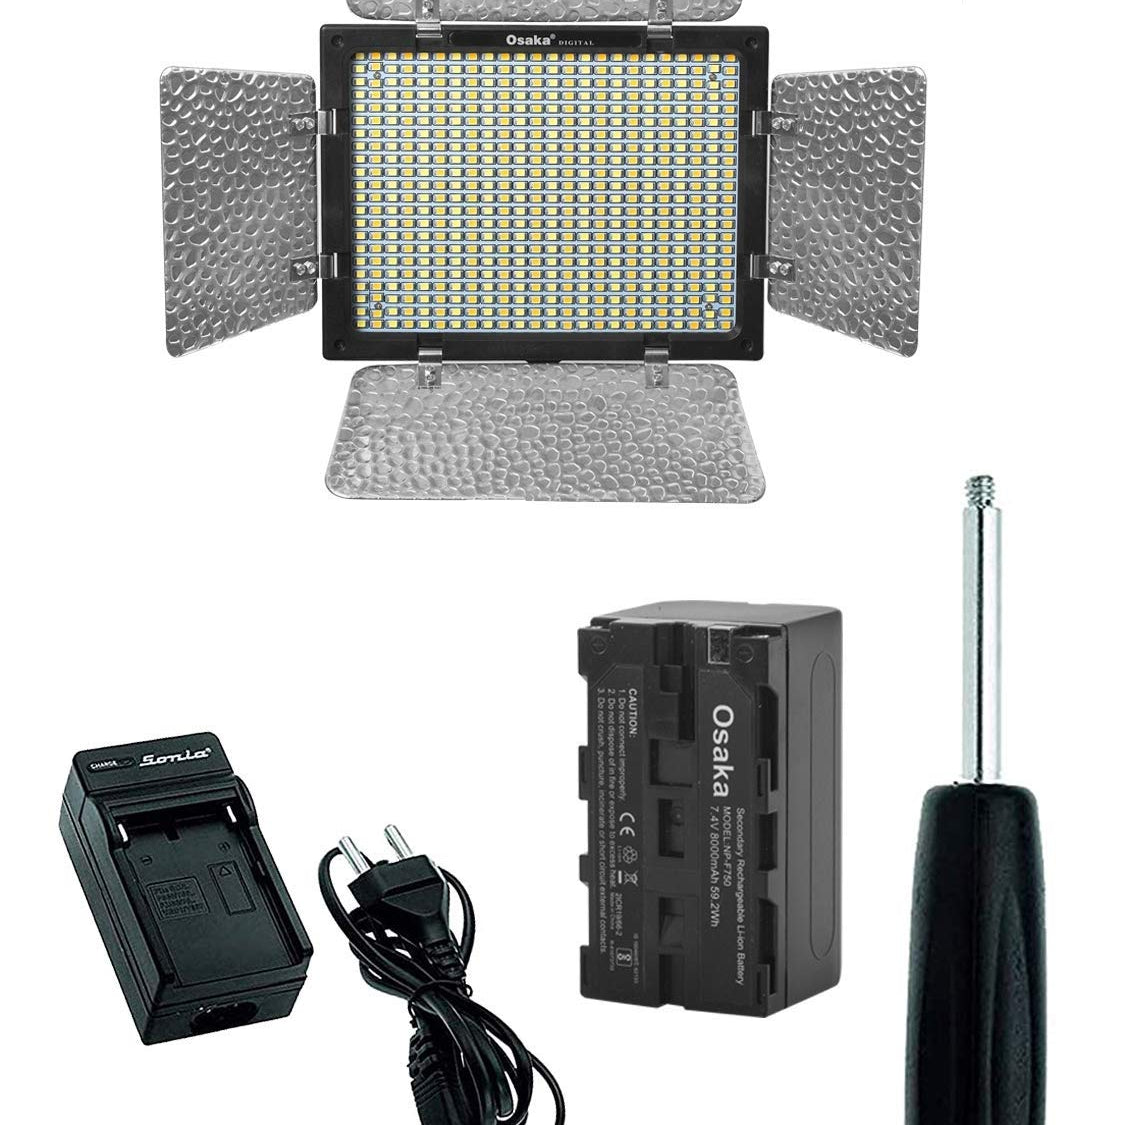 Osaka Bi-Color Dimmable LED Video Light OS 300 Mark III with Battery and Charger - The Camerashop